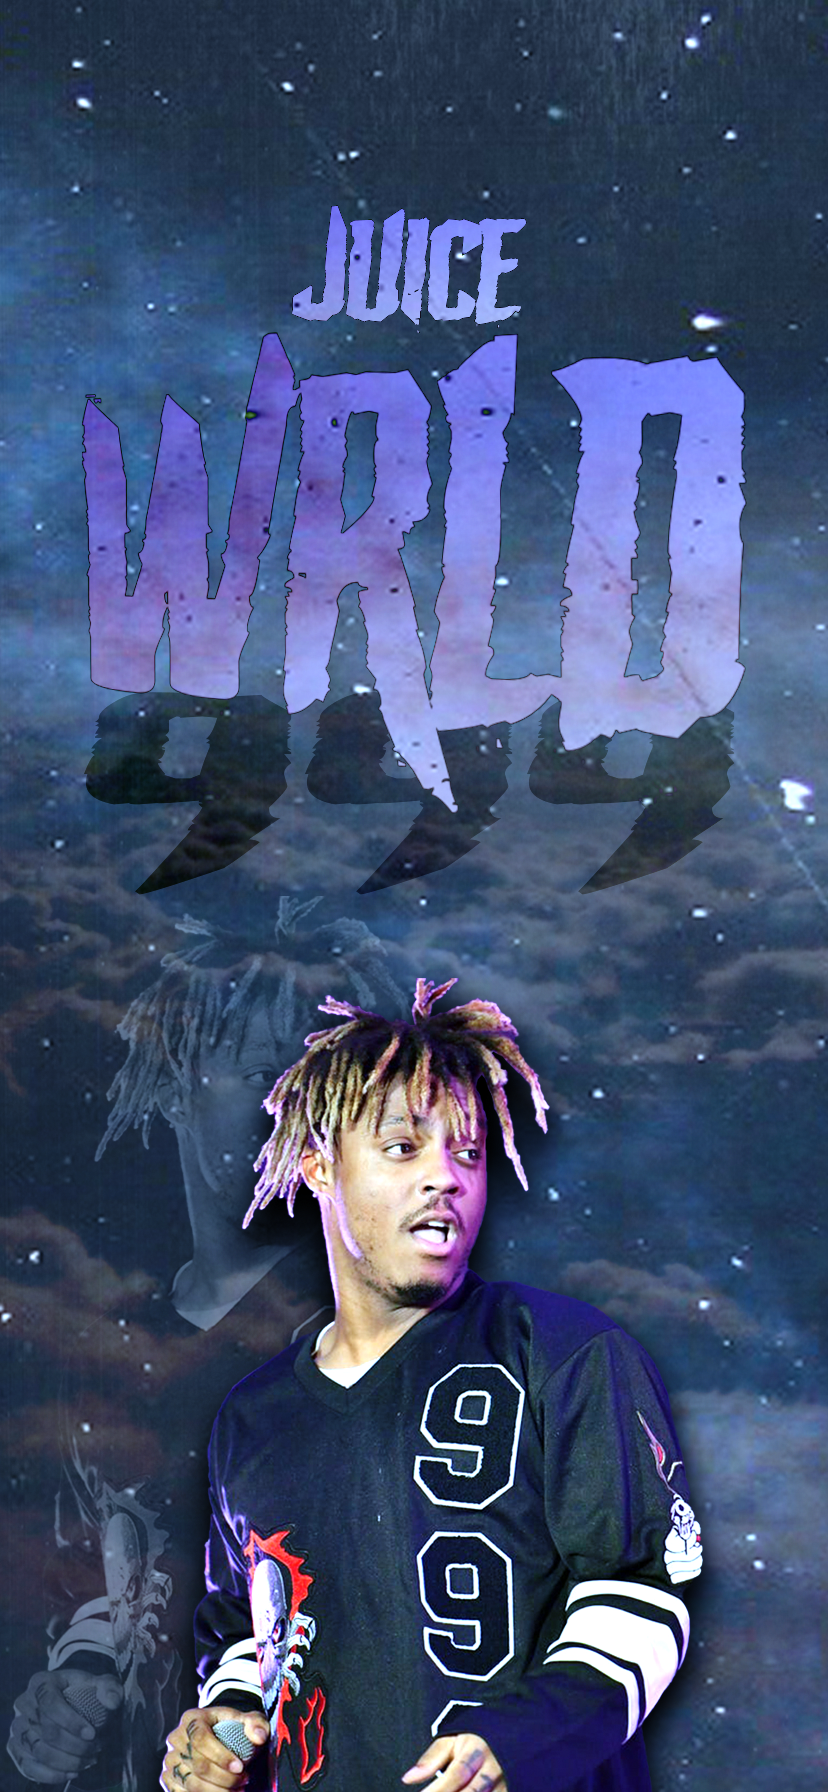 juice iPhone XR wallpaper, this will work on all phones but used XR size to make